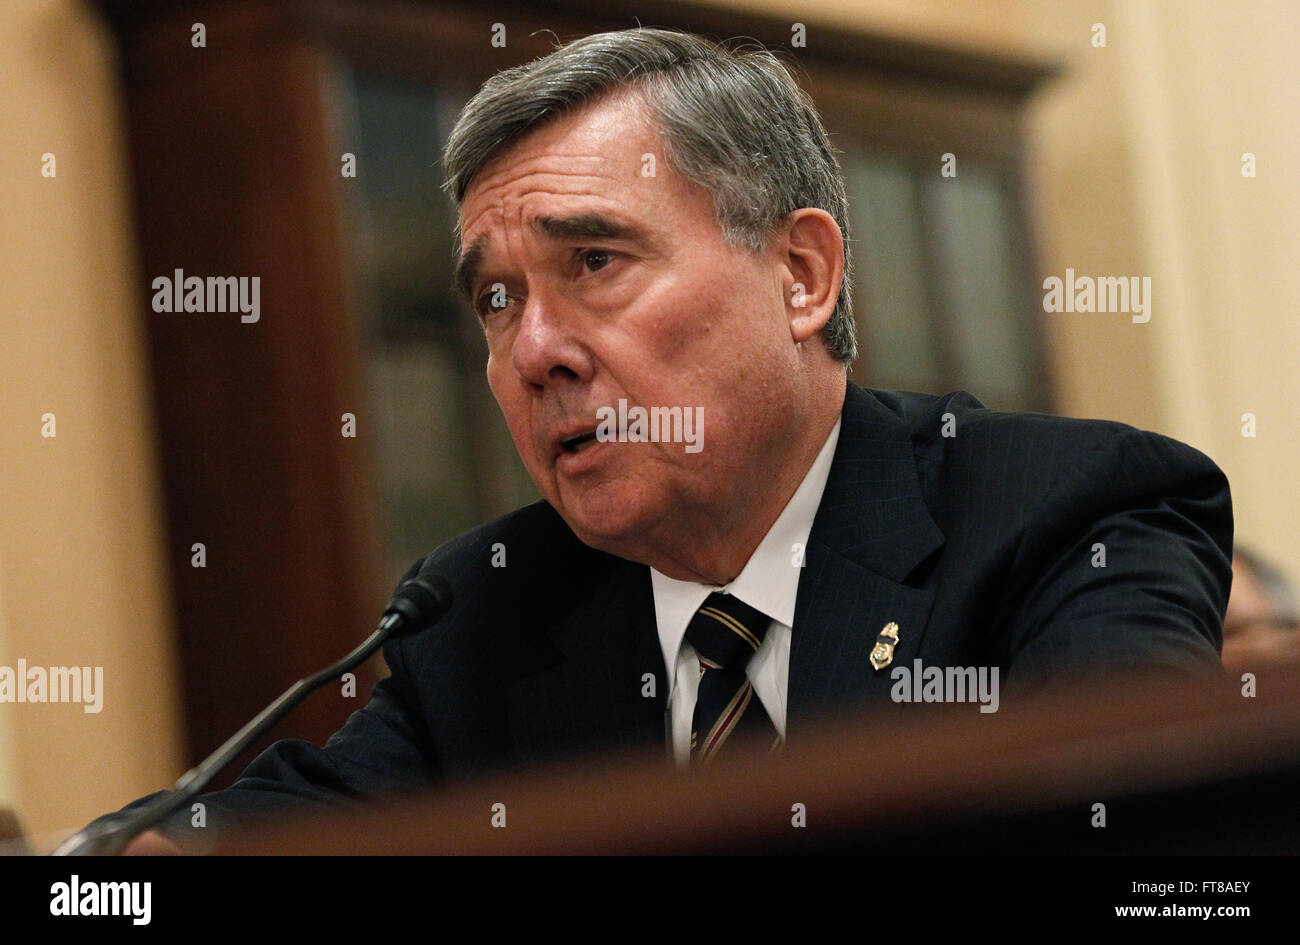 U.S. Customs and Border Protection Commissioner R. Gil Kerlikowske testifies on the Visa Waiver Program Improvement and Terrorist Travel Prevention Act before the House Homeland Security Committee in Washington, D.C., Feb. 10, 2016. (CBP Photo by Glenn Fawcett) Stock Photo